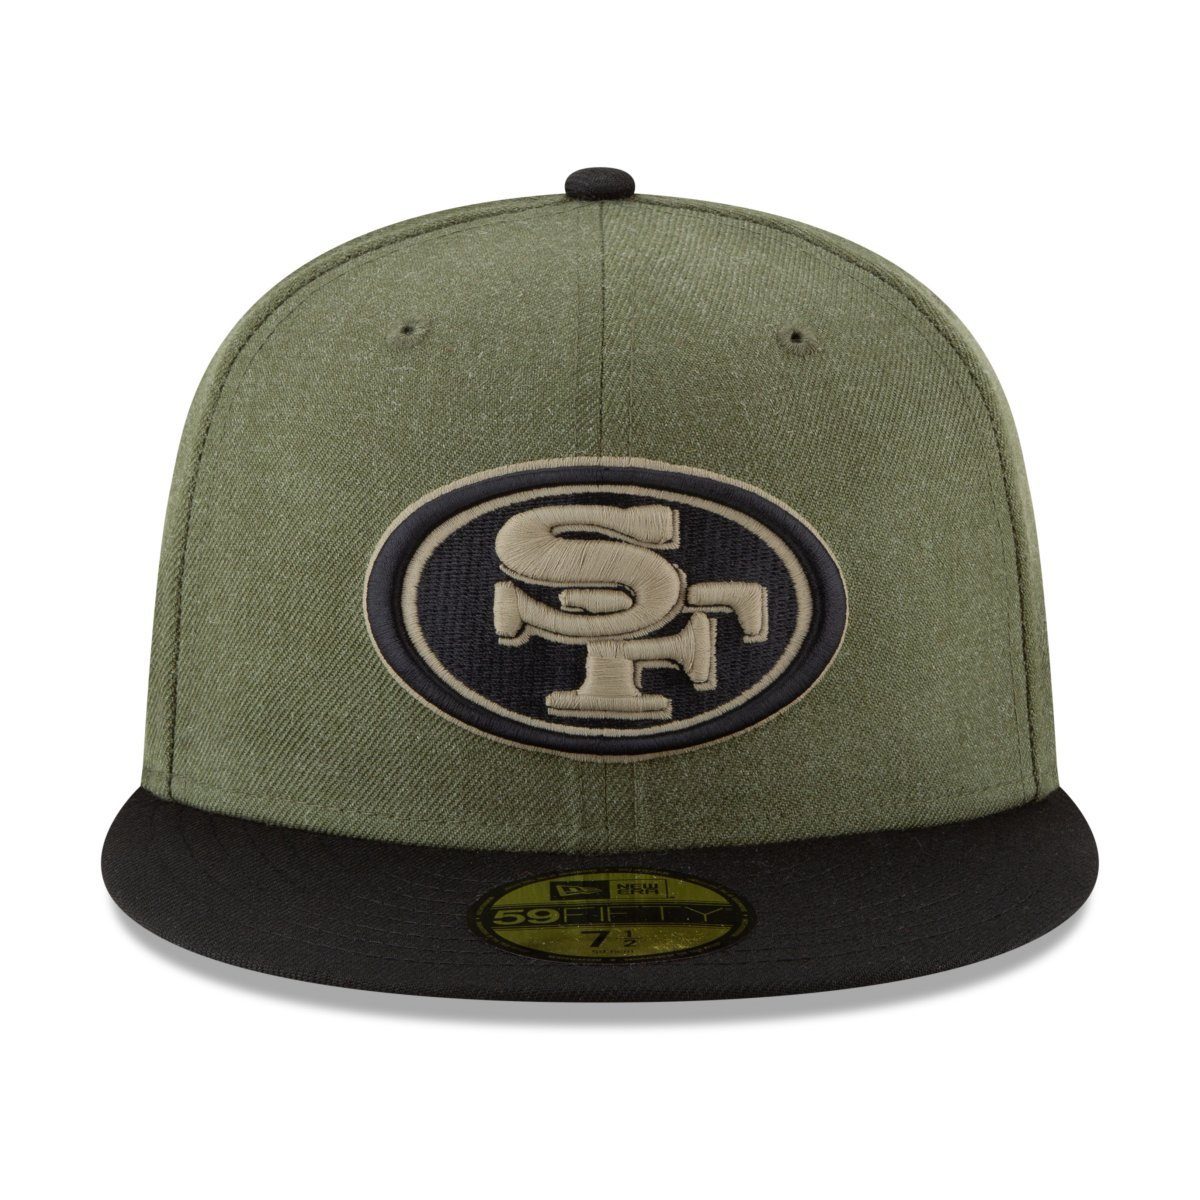 New Era Fitted Cap 59Fifty San Service Salute 49ers NFL to Francisco